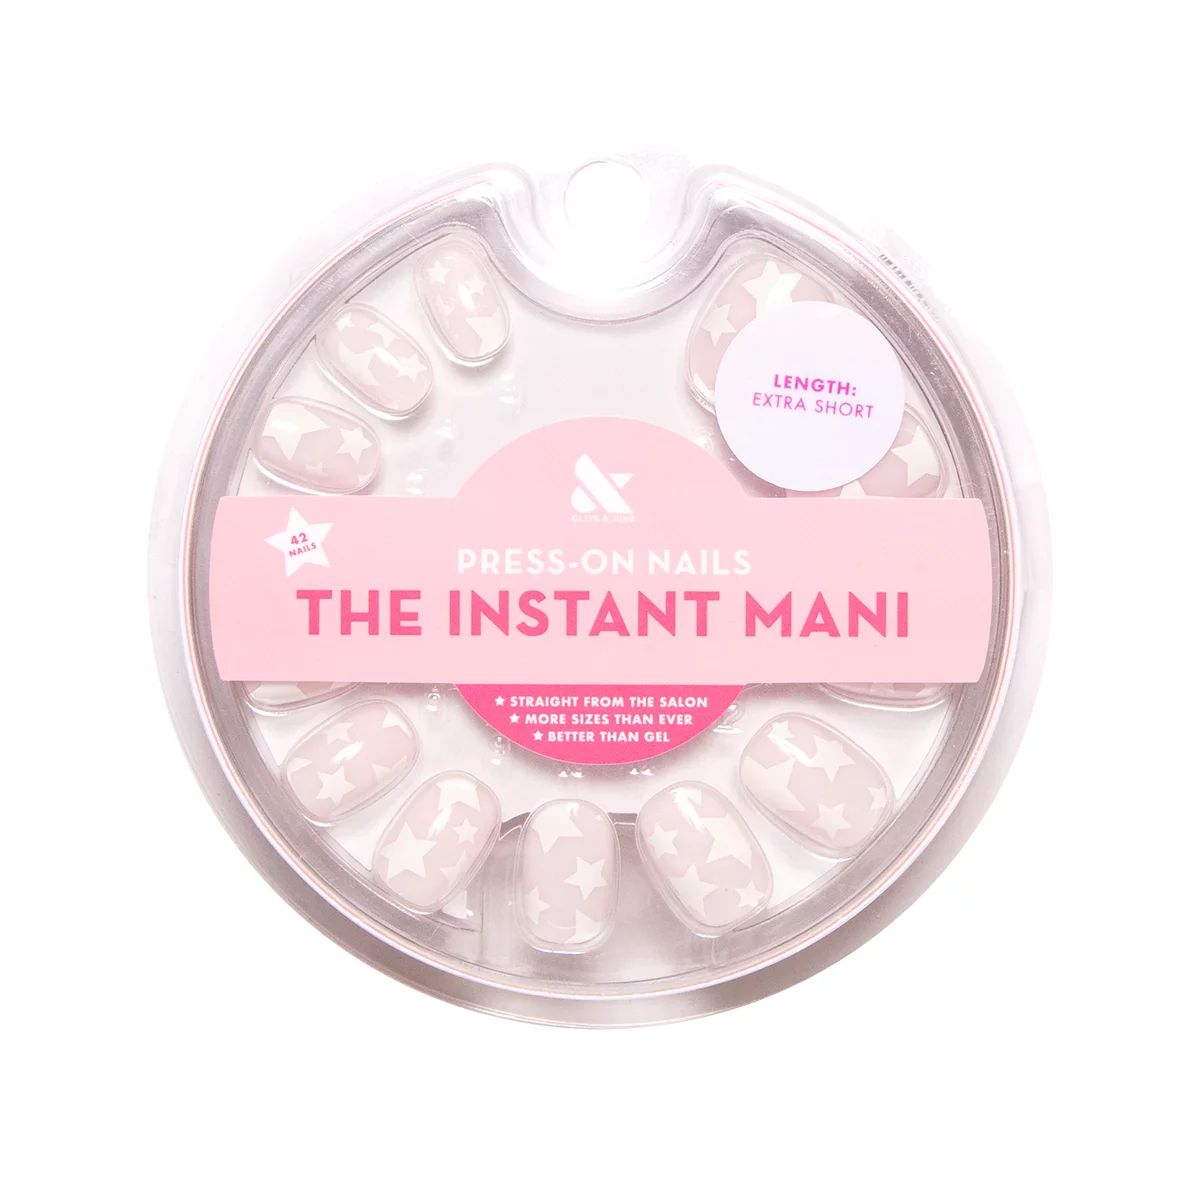 Olive & June Instant Mani Round Extra Short Press-On Nails, White, Super Stars, 42 Pieces | Walmart (US)